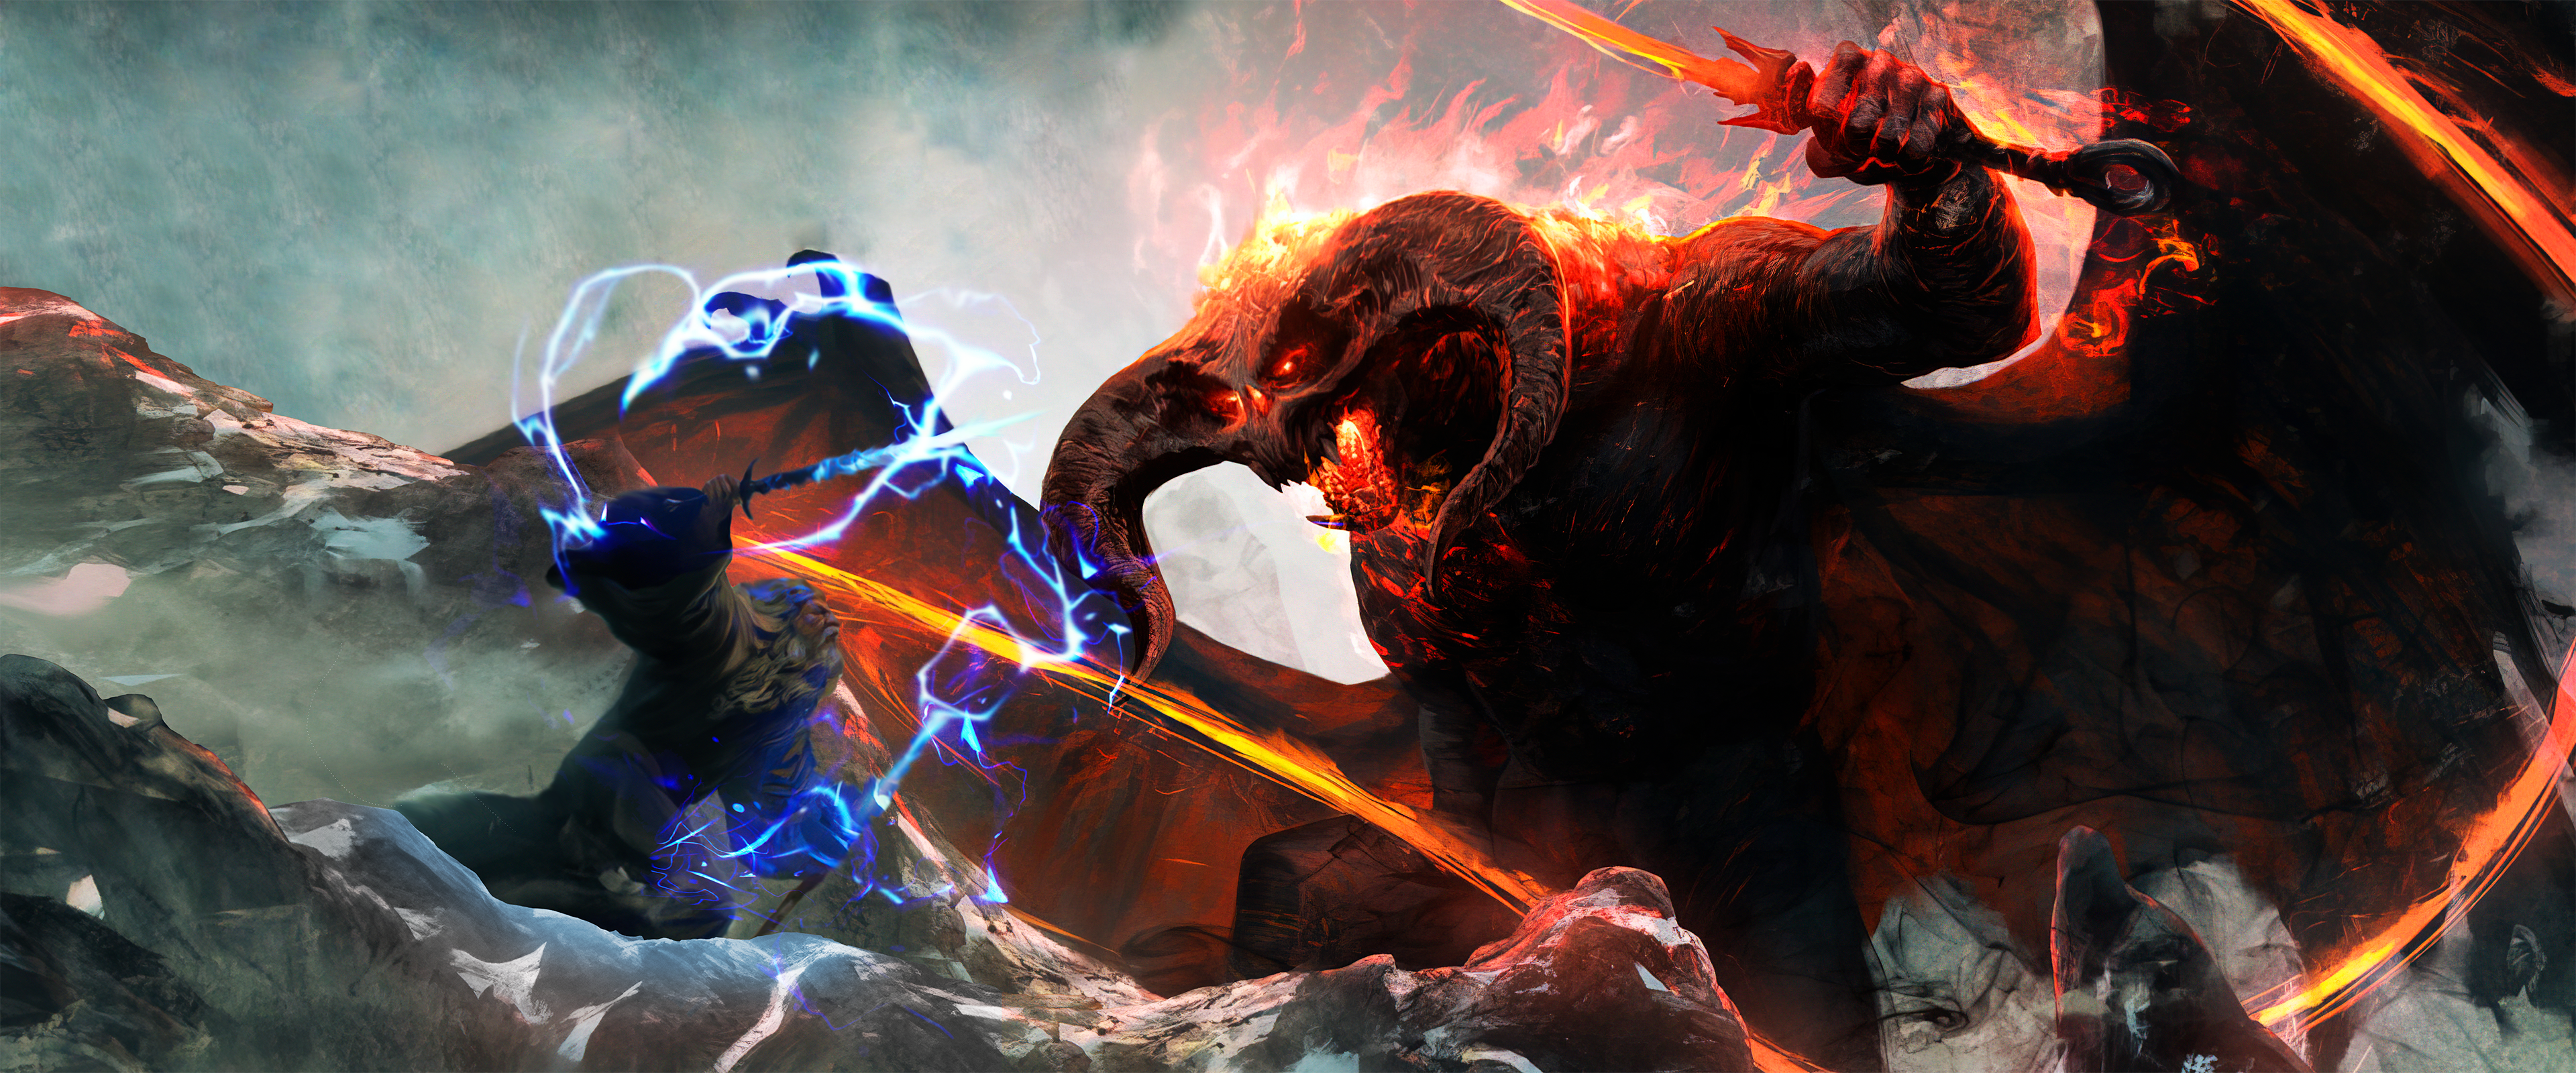 General 3840x1600 Gandalf Balrog The Lord of the Rings digital art Middle-Earth